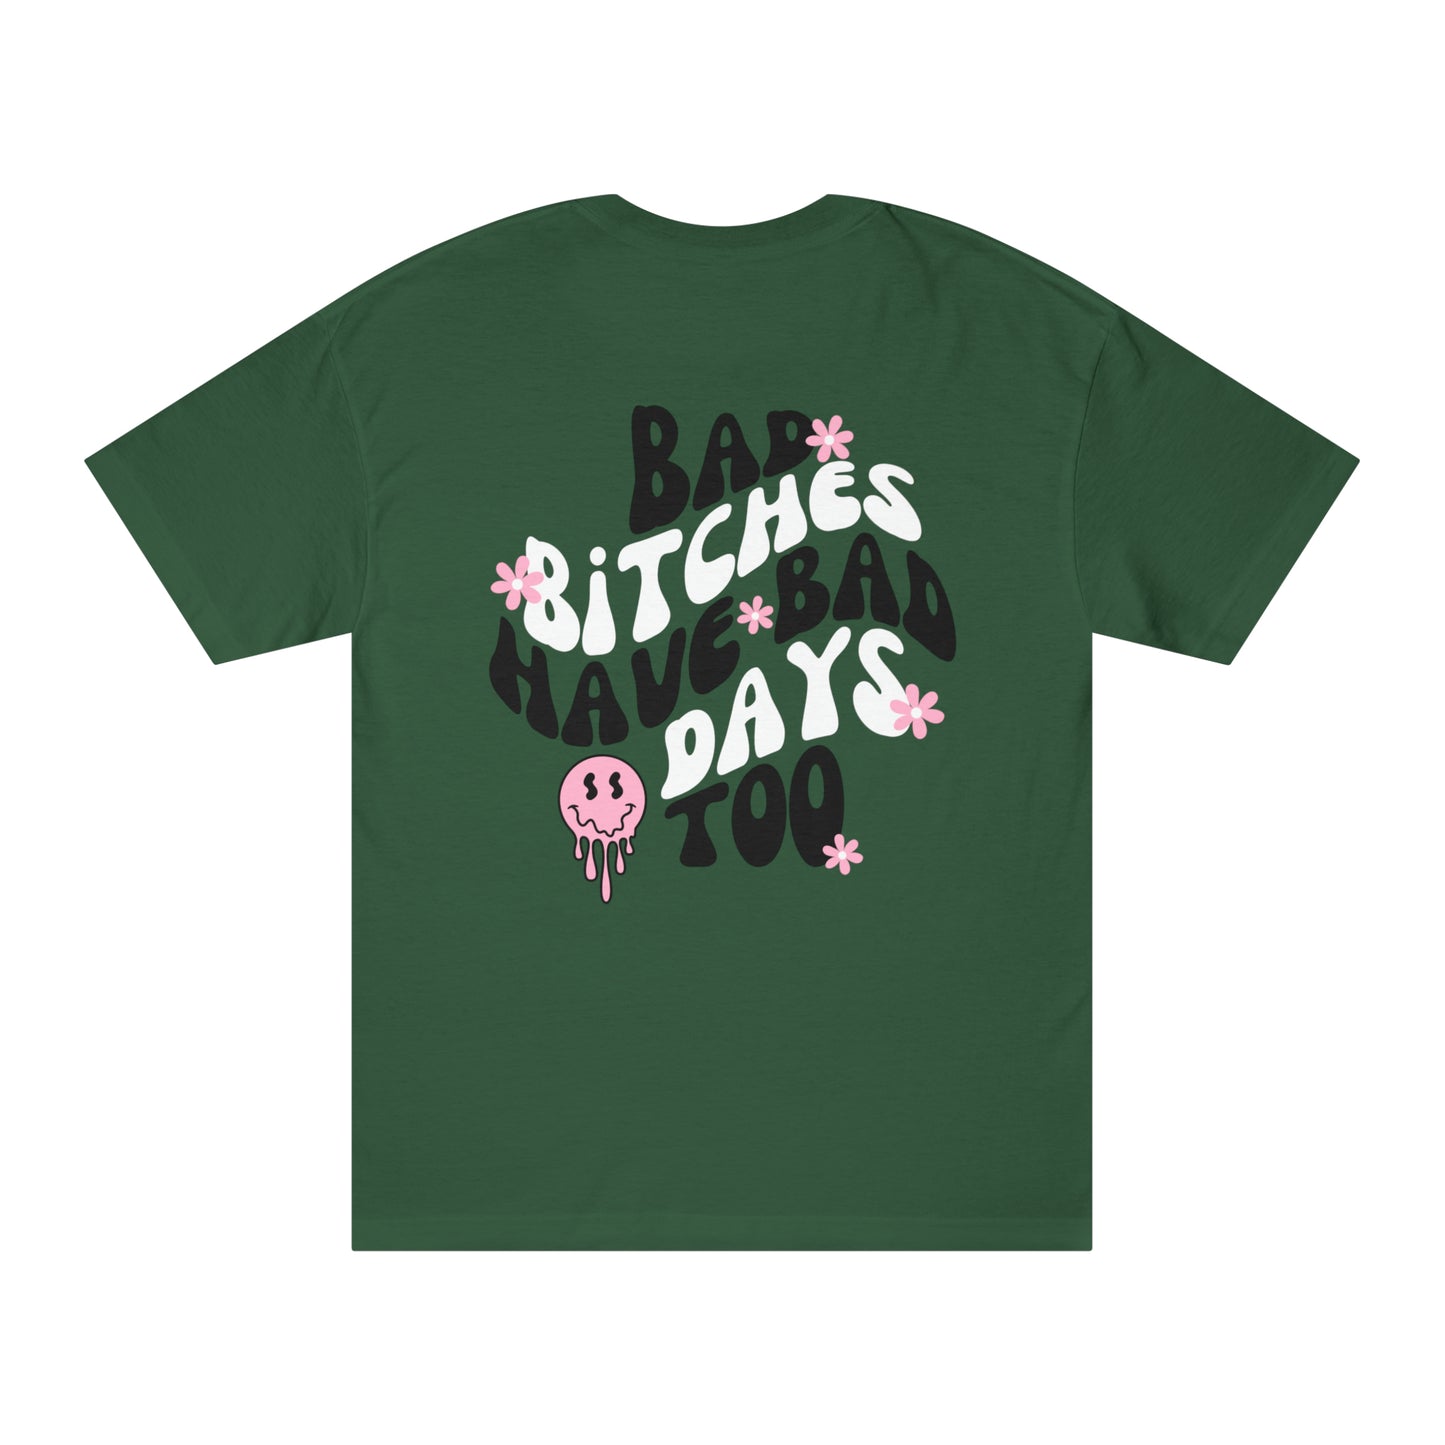 Bad Bitches Have Bad Days Too Unisex Classic Tee